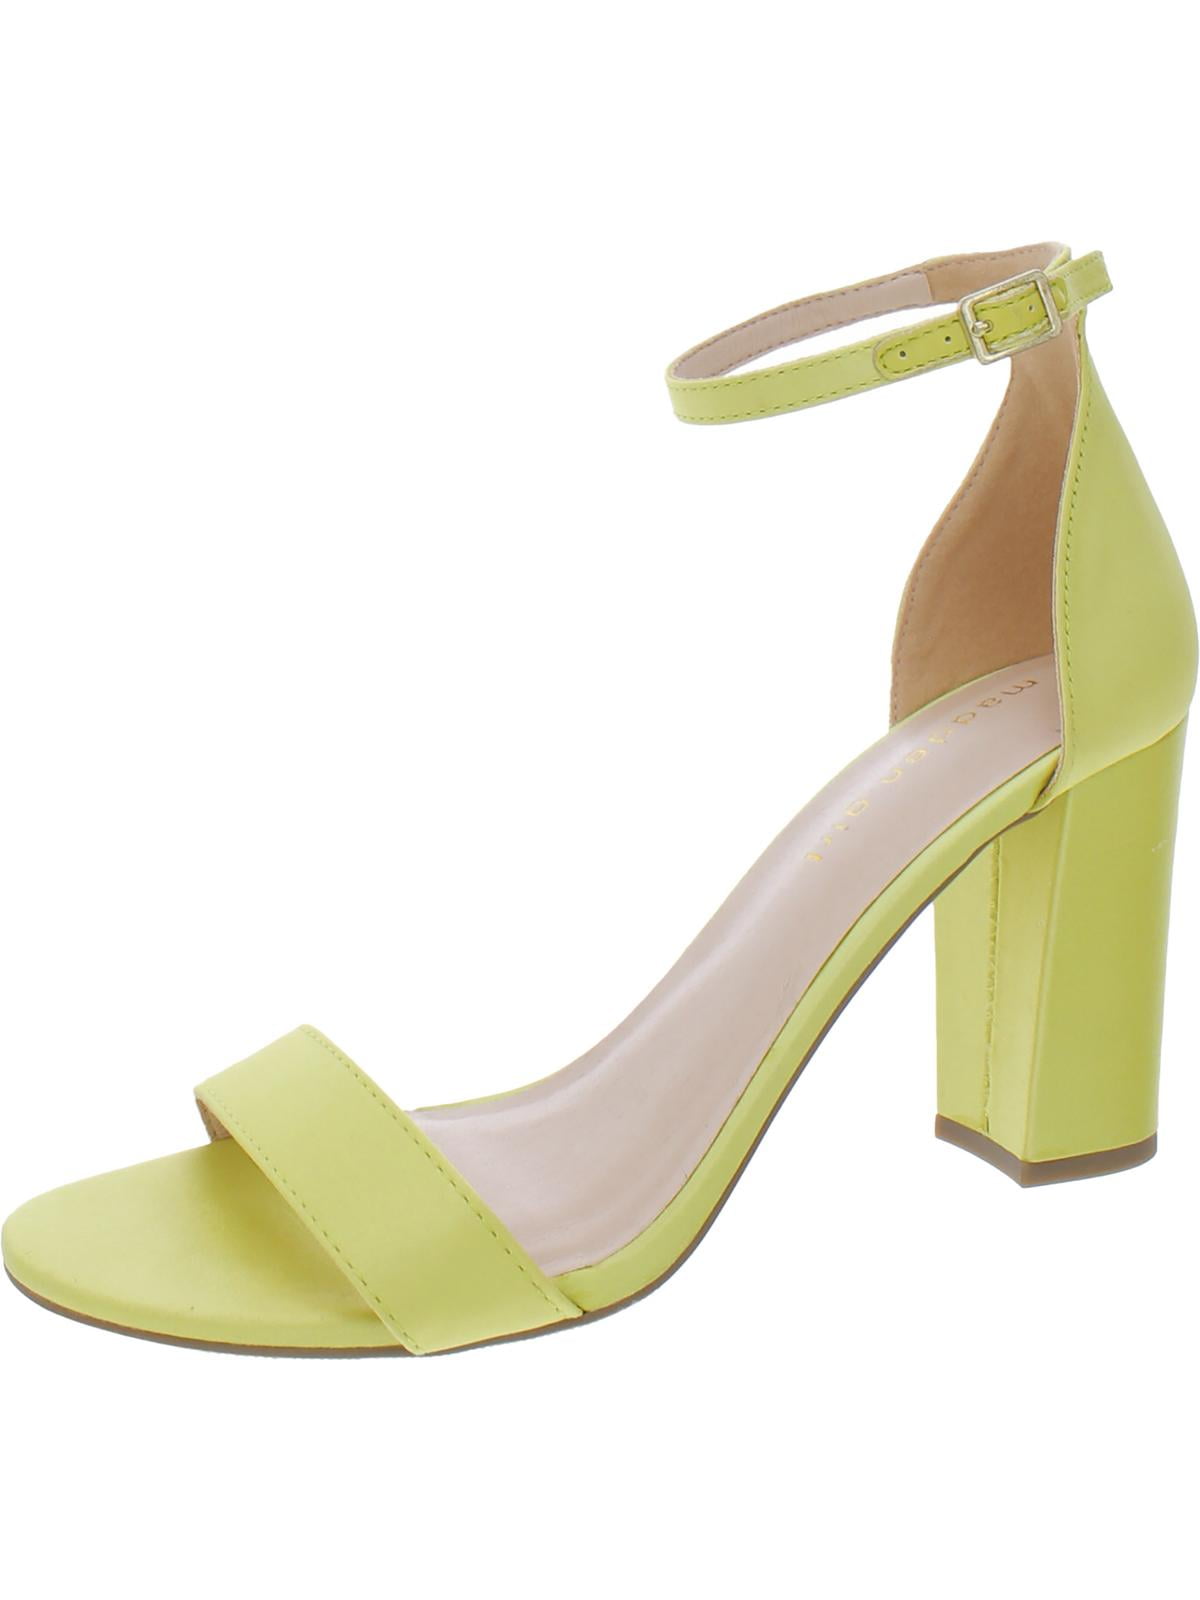 Light Yellow Heel Sandals with Twisted Strap - PEDRO MY